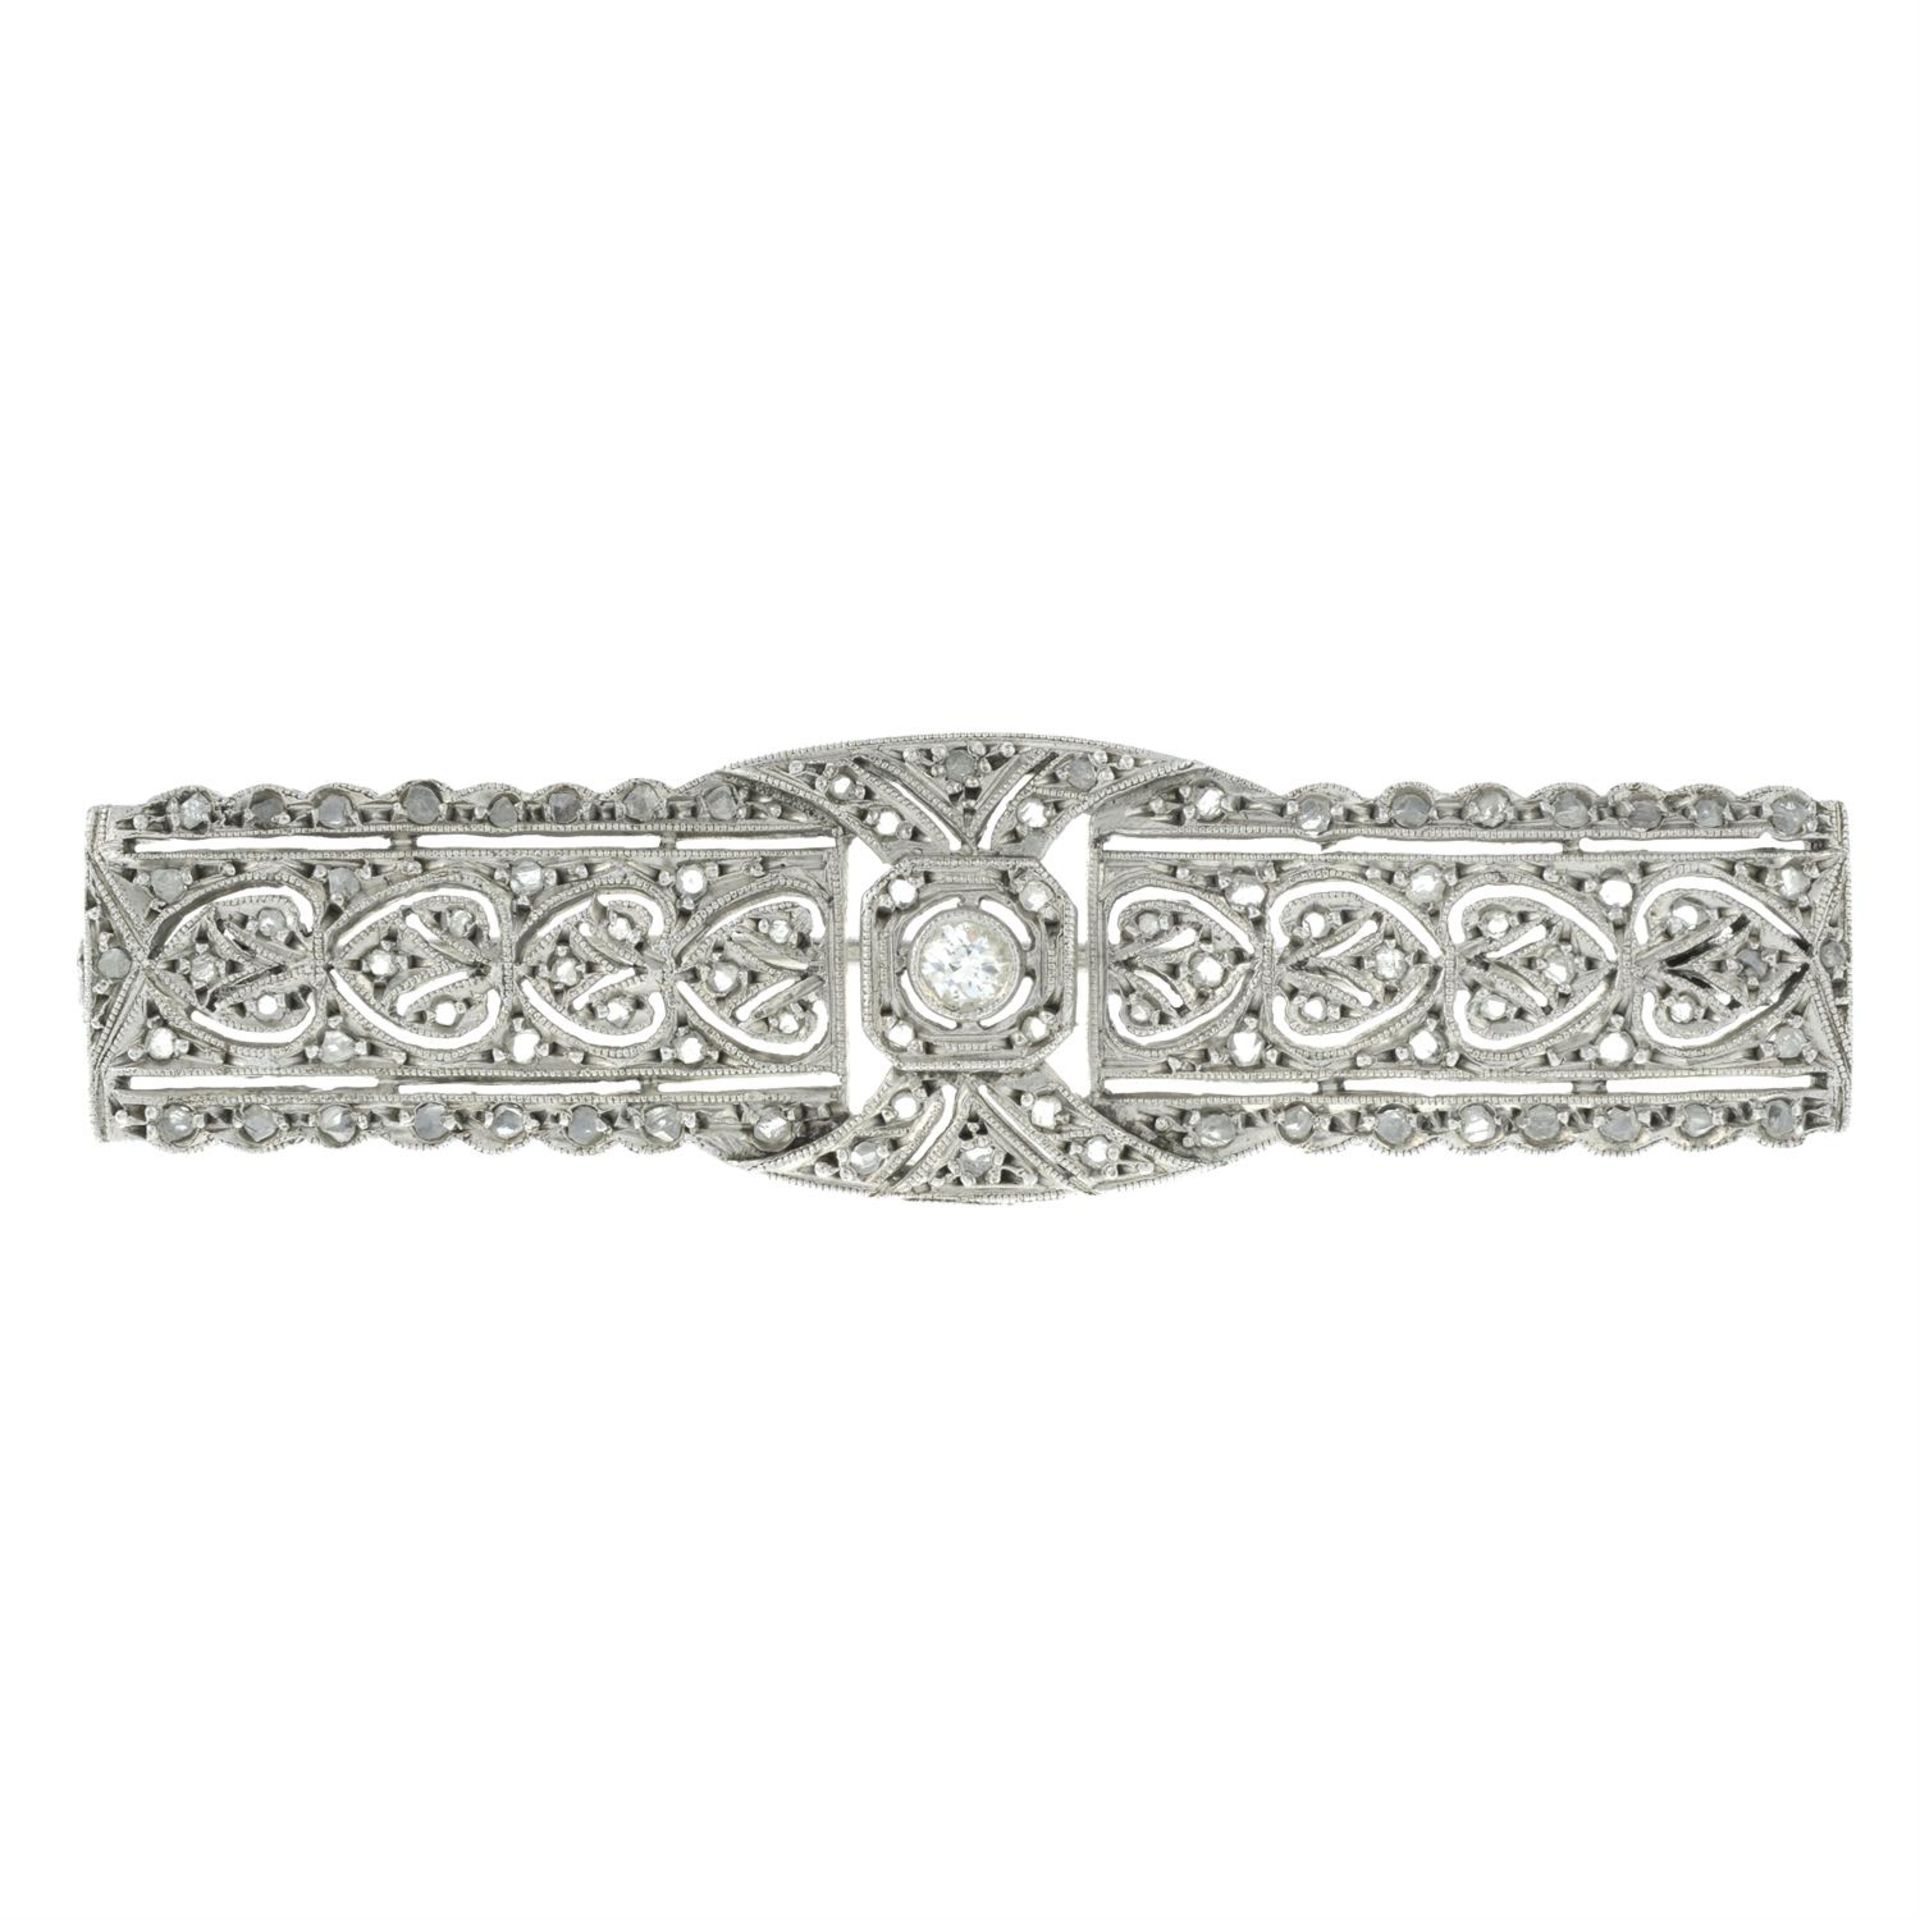 An early 20th century platinum rose and old-cut diamond openwork plaque brooch.